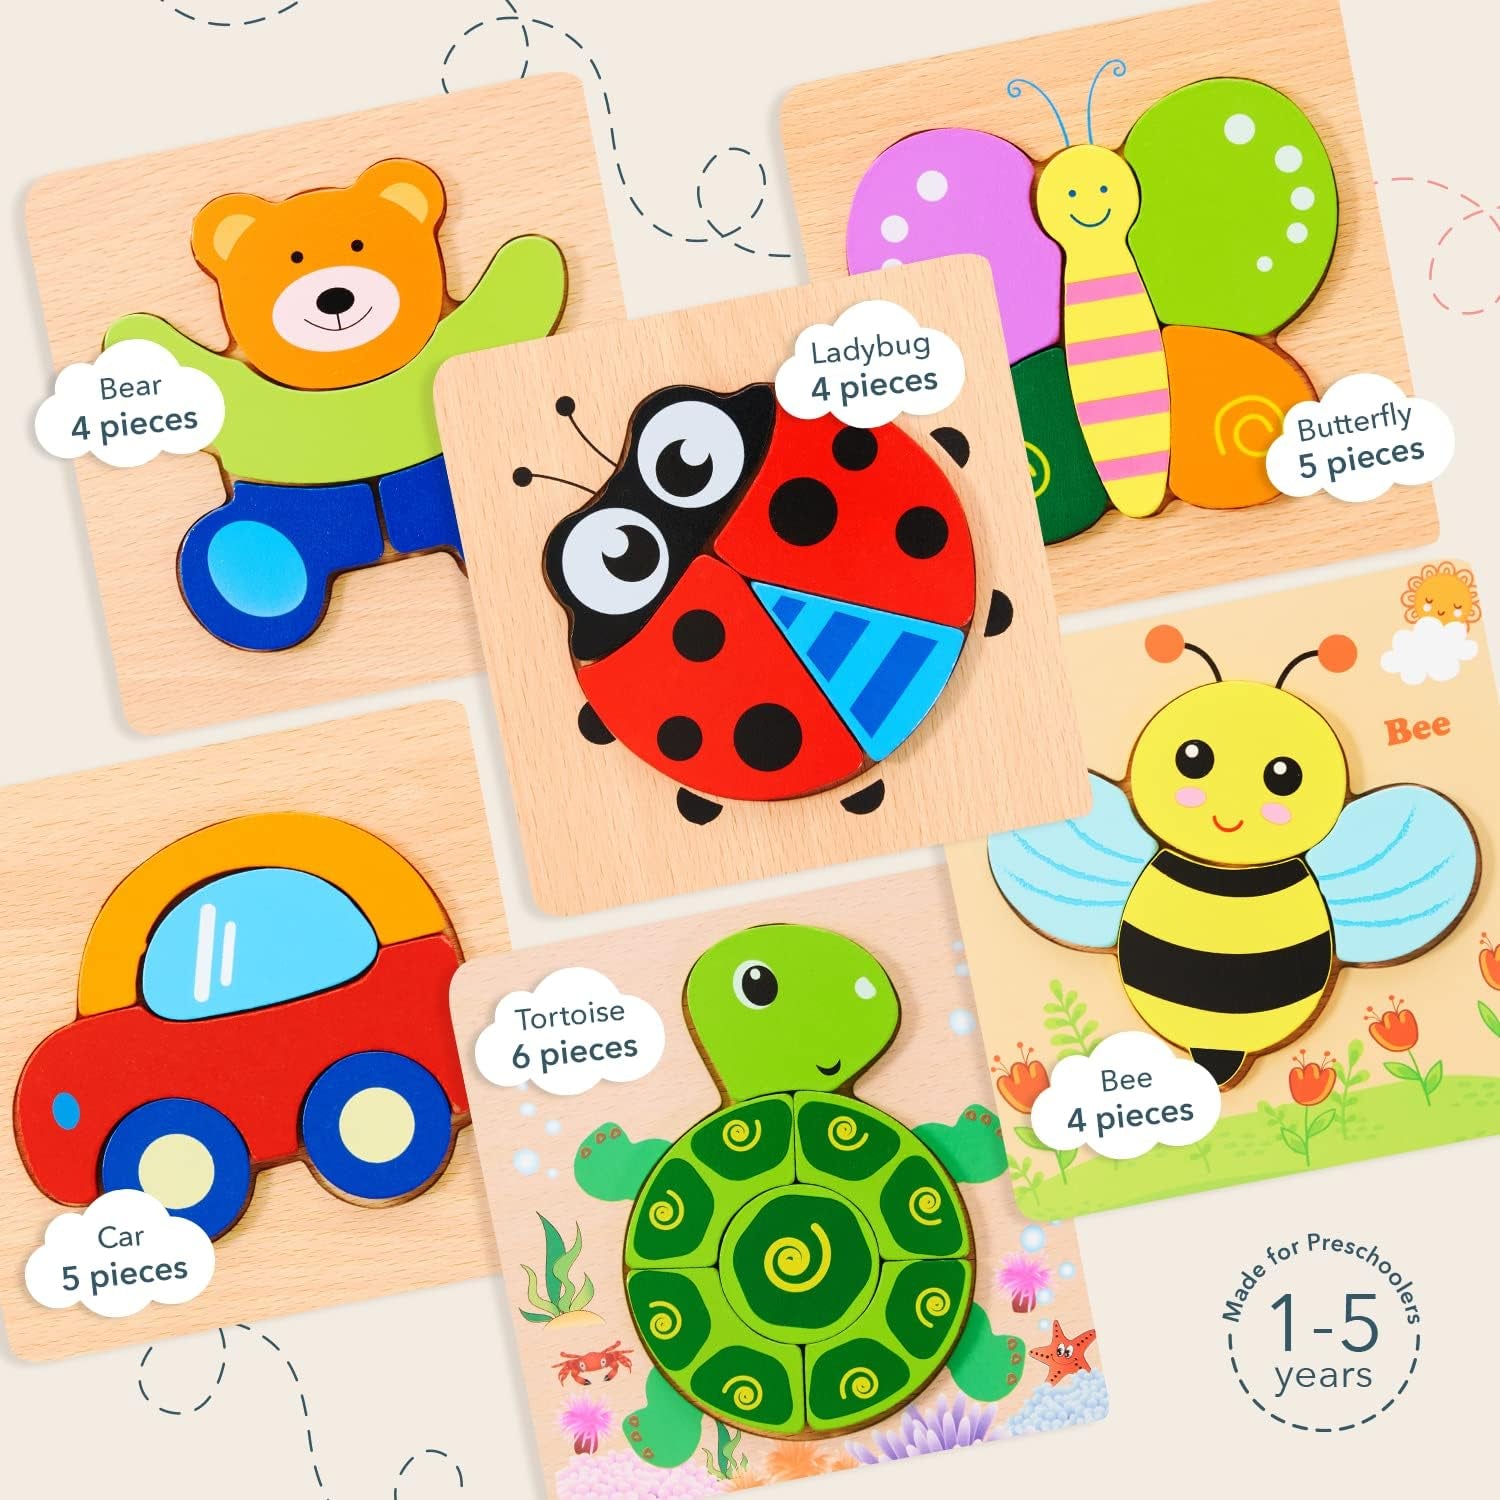 Wood Puzzles for Toddlers 1-3, Set of 6 Montessori Toys for 1 Year Old, Toddler Puzzles, Baby Puzzles with Large Pieces Safe for Kids, Includes Storage Bag and Giftable Box